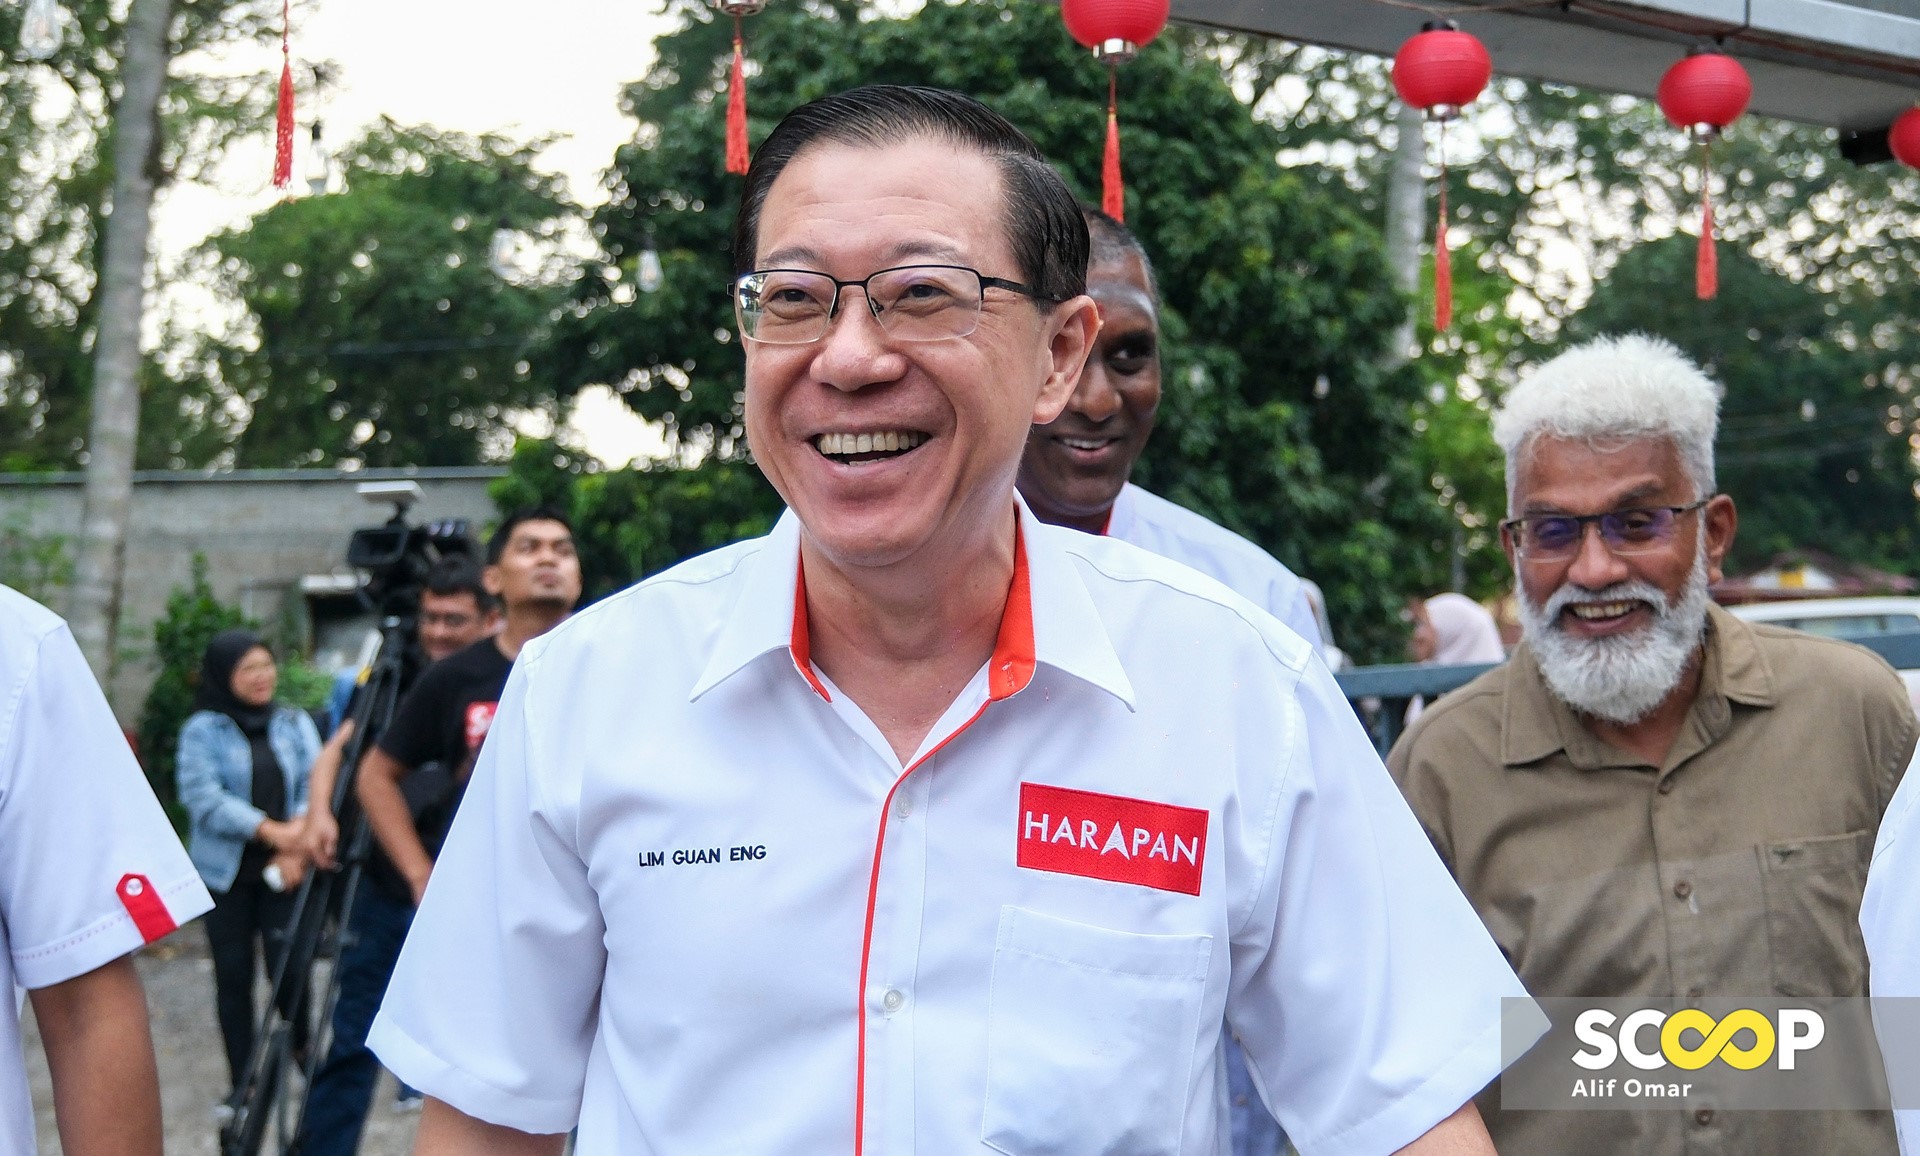 Voting Perikatan to ‘blow off steam’ won't solve livelihood issues, says Guan Eng